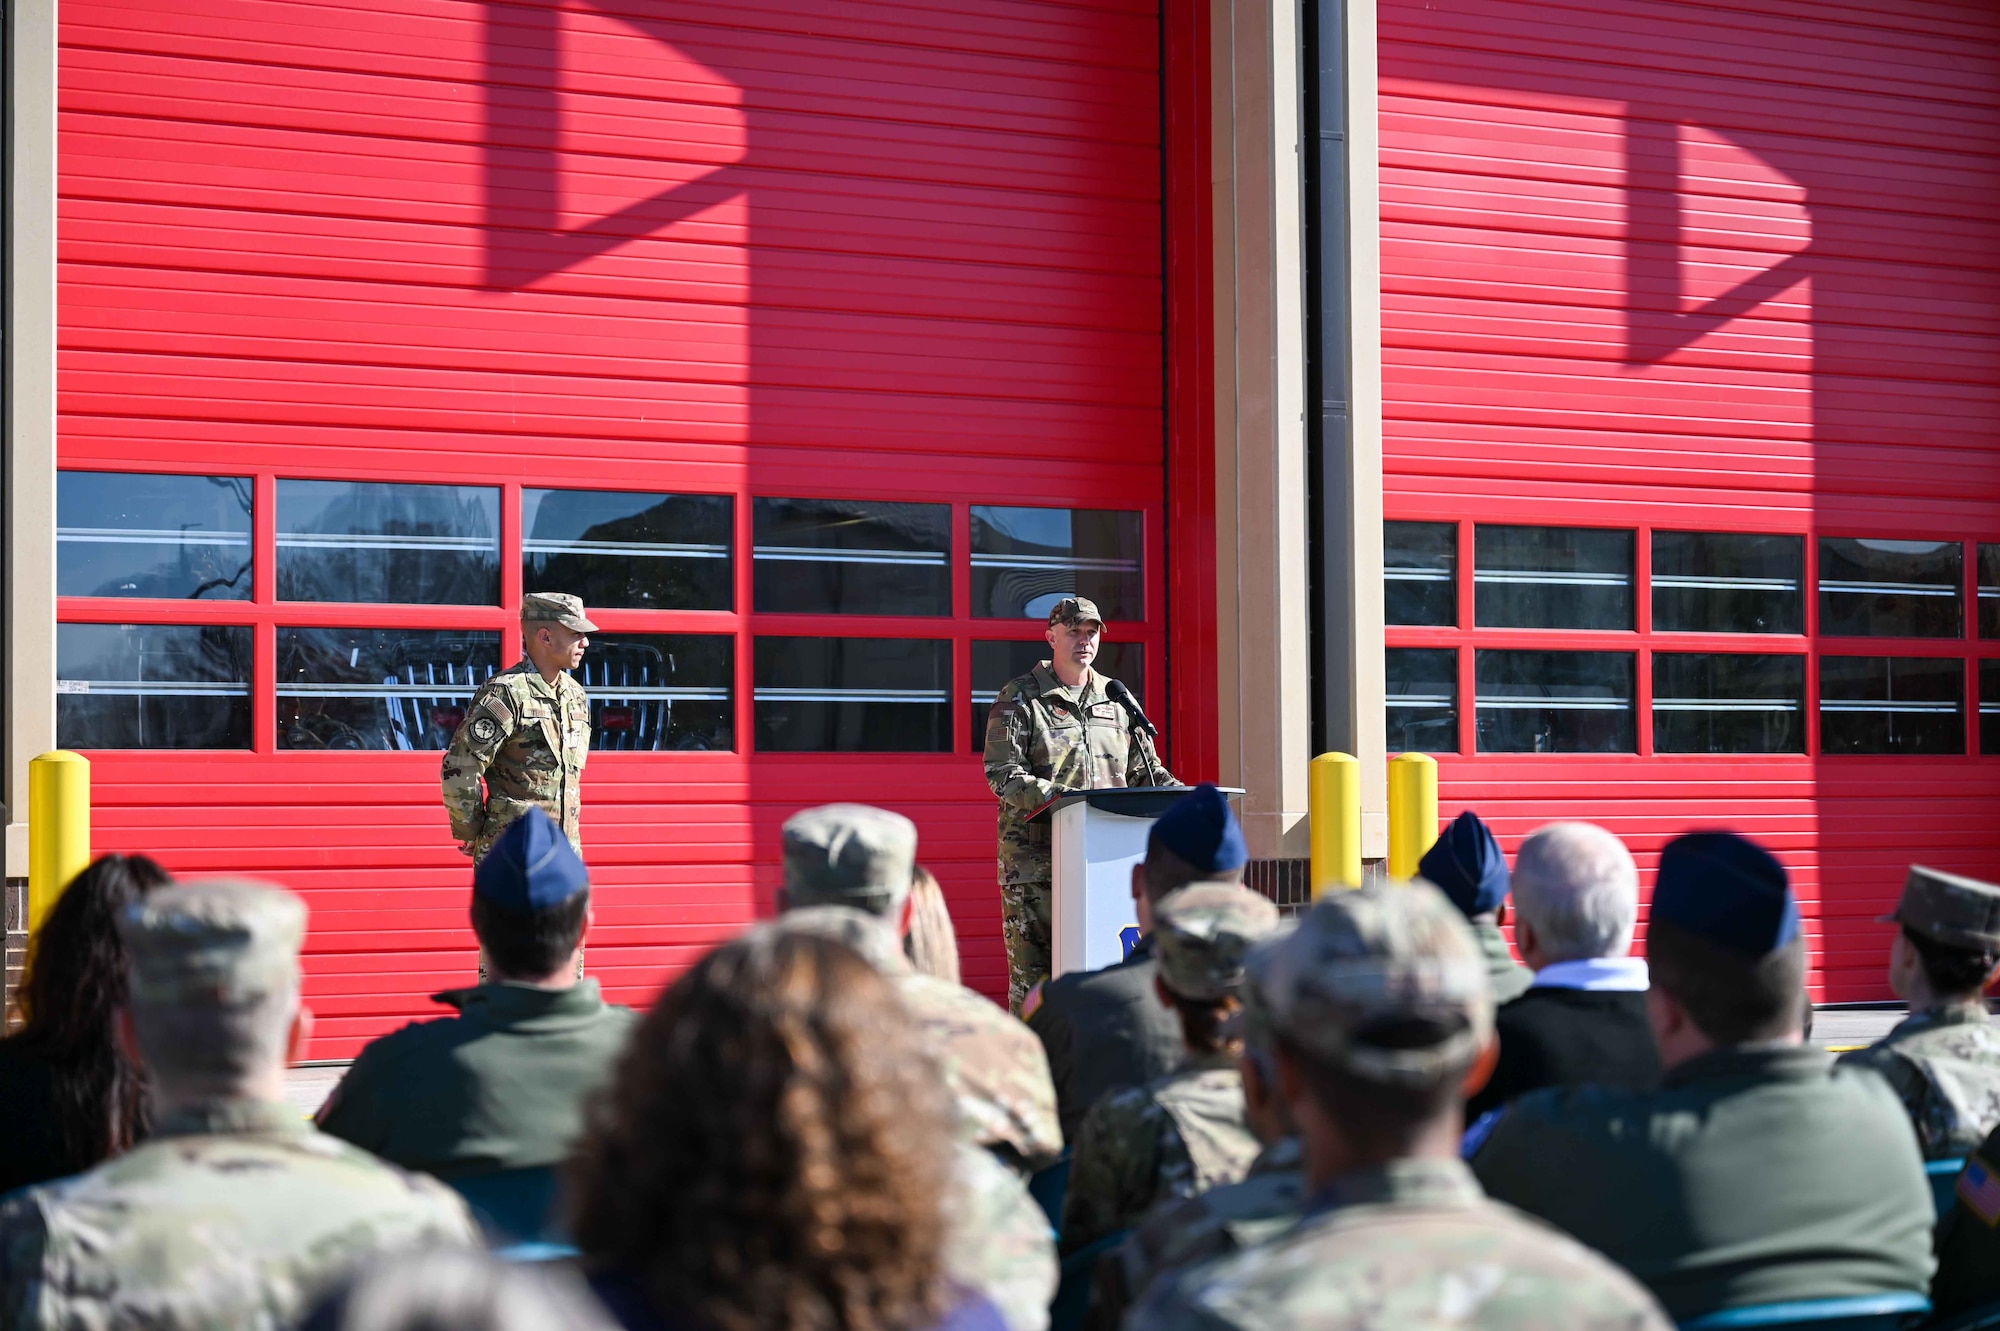 U.S. Air Force Col. Jeff Marshall, 97th Air Mobility Wing commander, gives a speech at the opening of the 97th Civil Engineer Squadron’s headquarters fire station at Altus Air Force Base, Oklahoma, Dec. 1, 2023. Leadership, base personnel, and members of the local community came to celebrate the opening of the new fire station. (U.S. Air Force photo by Airman 1st Class Kari Degraffenreed)